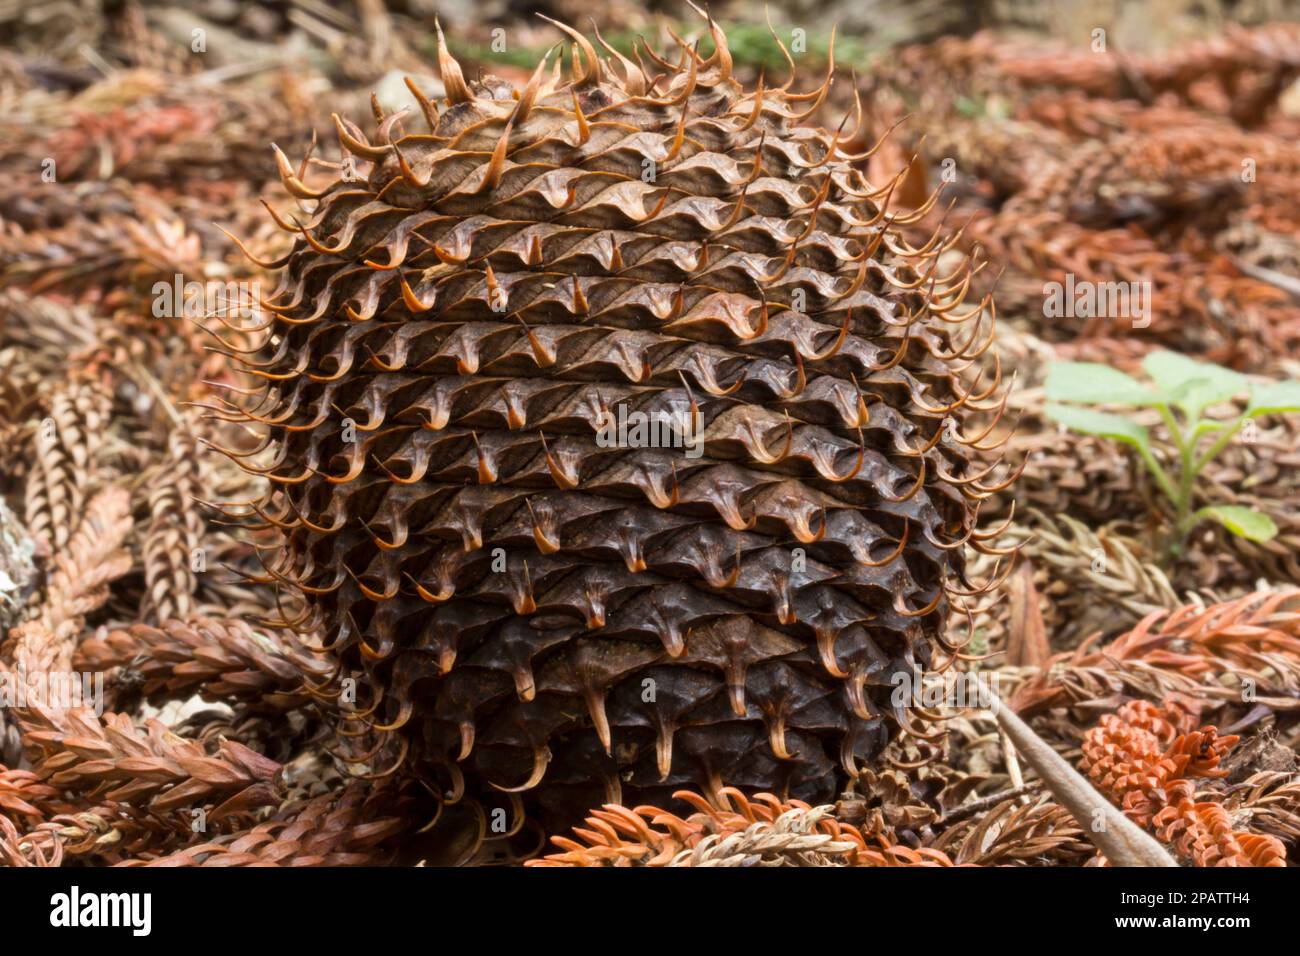 Female Hoop Pine (Araucaria cunninghamii) cone that has matured and fallen from the tree. Yarraman Queensland Australia Stock Photo